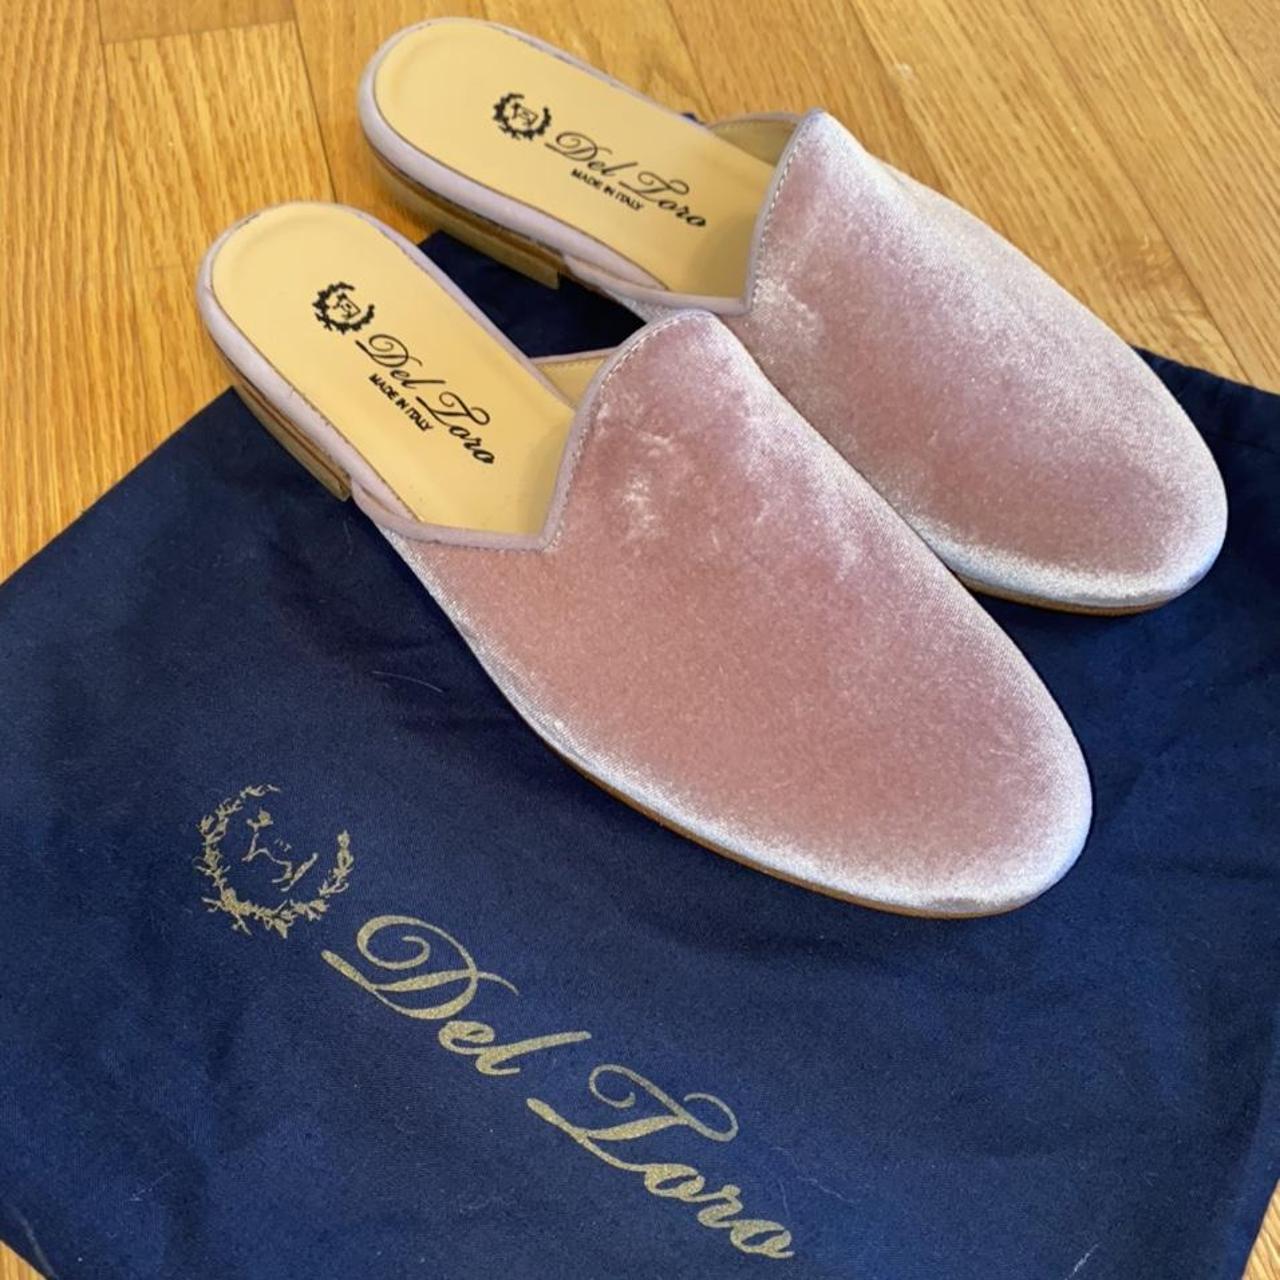 Product Image 4 - Del Toro pink house slippers.